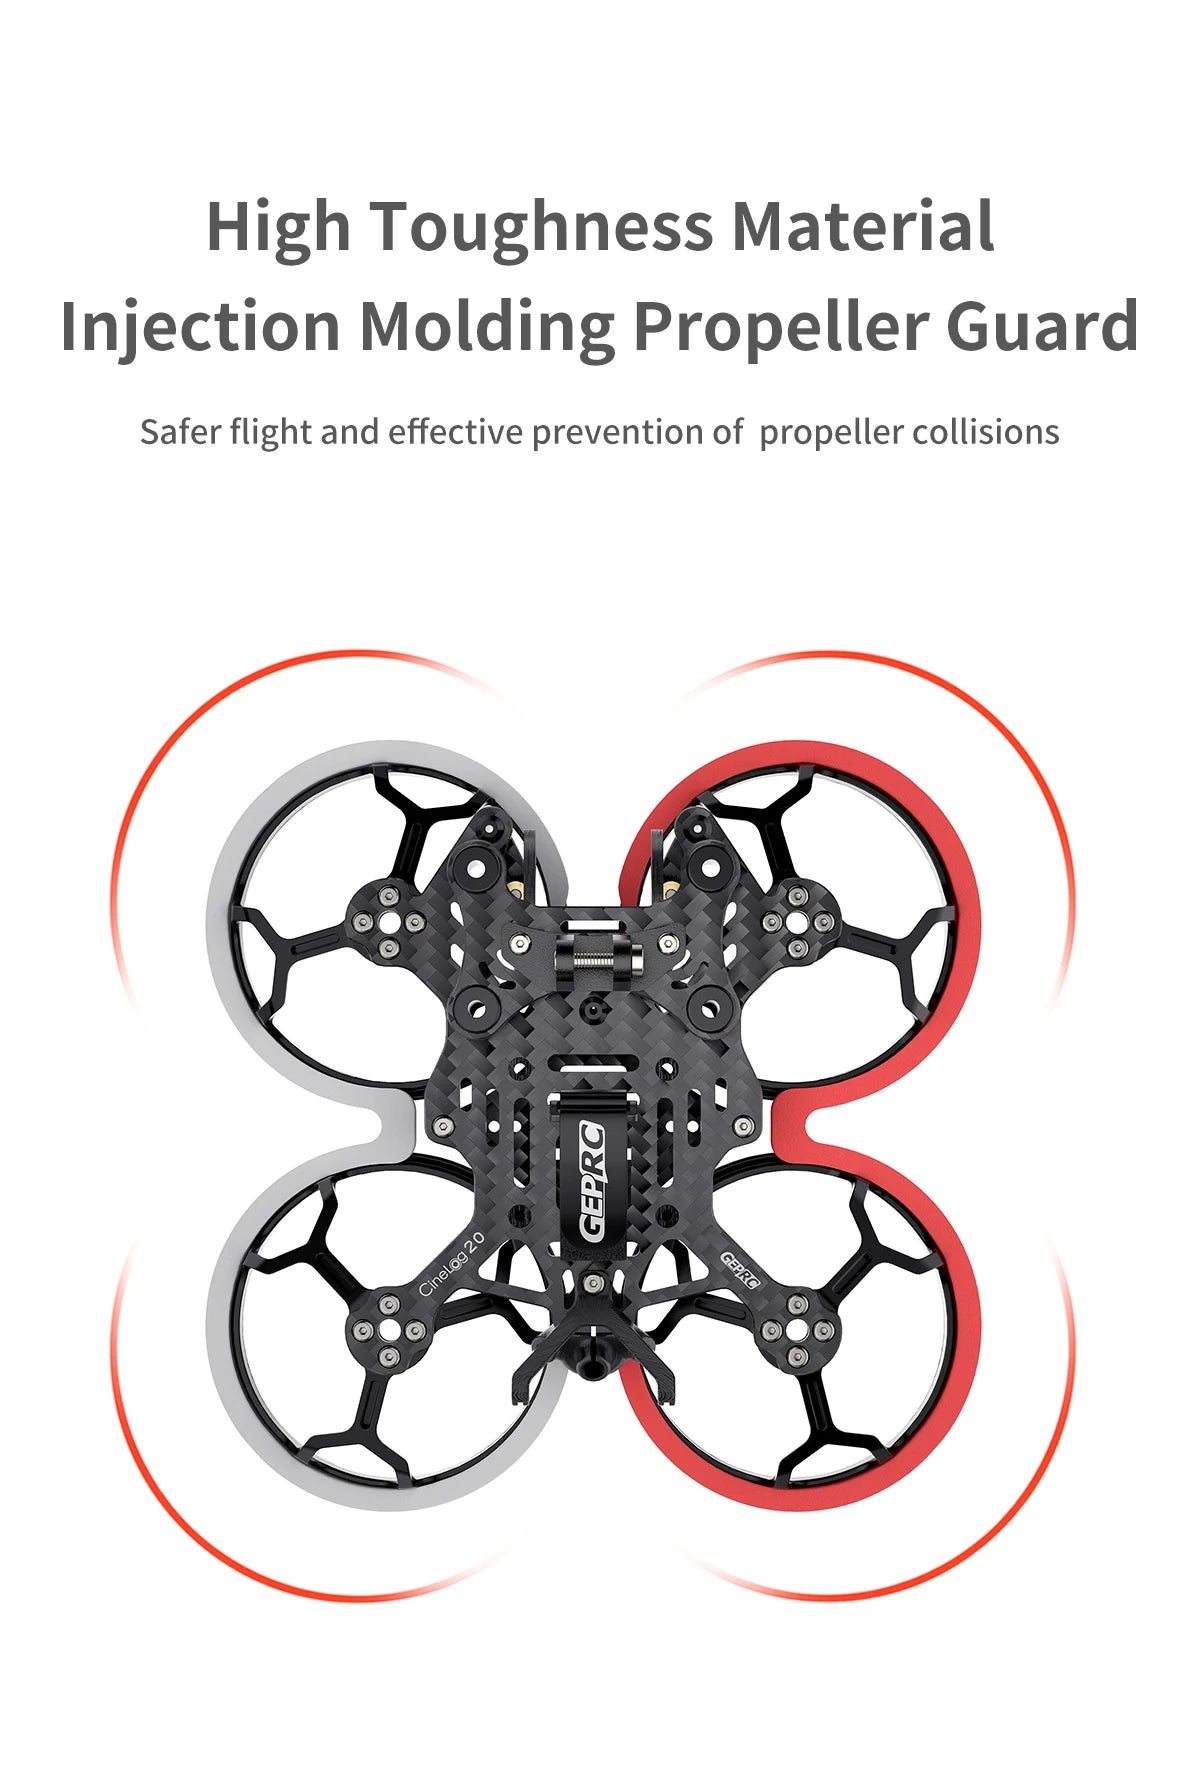 GEPRC GEP-CL20 Frame Parts Propeller Accessory, High Toughness Material Injection Molding Propeller Guard Safer flight and effective prevention of